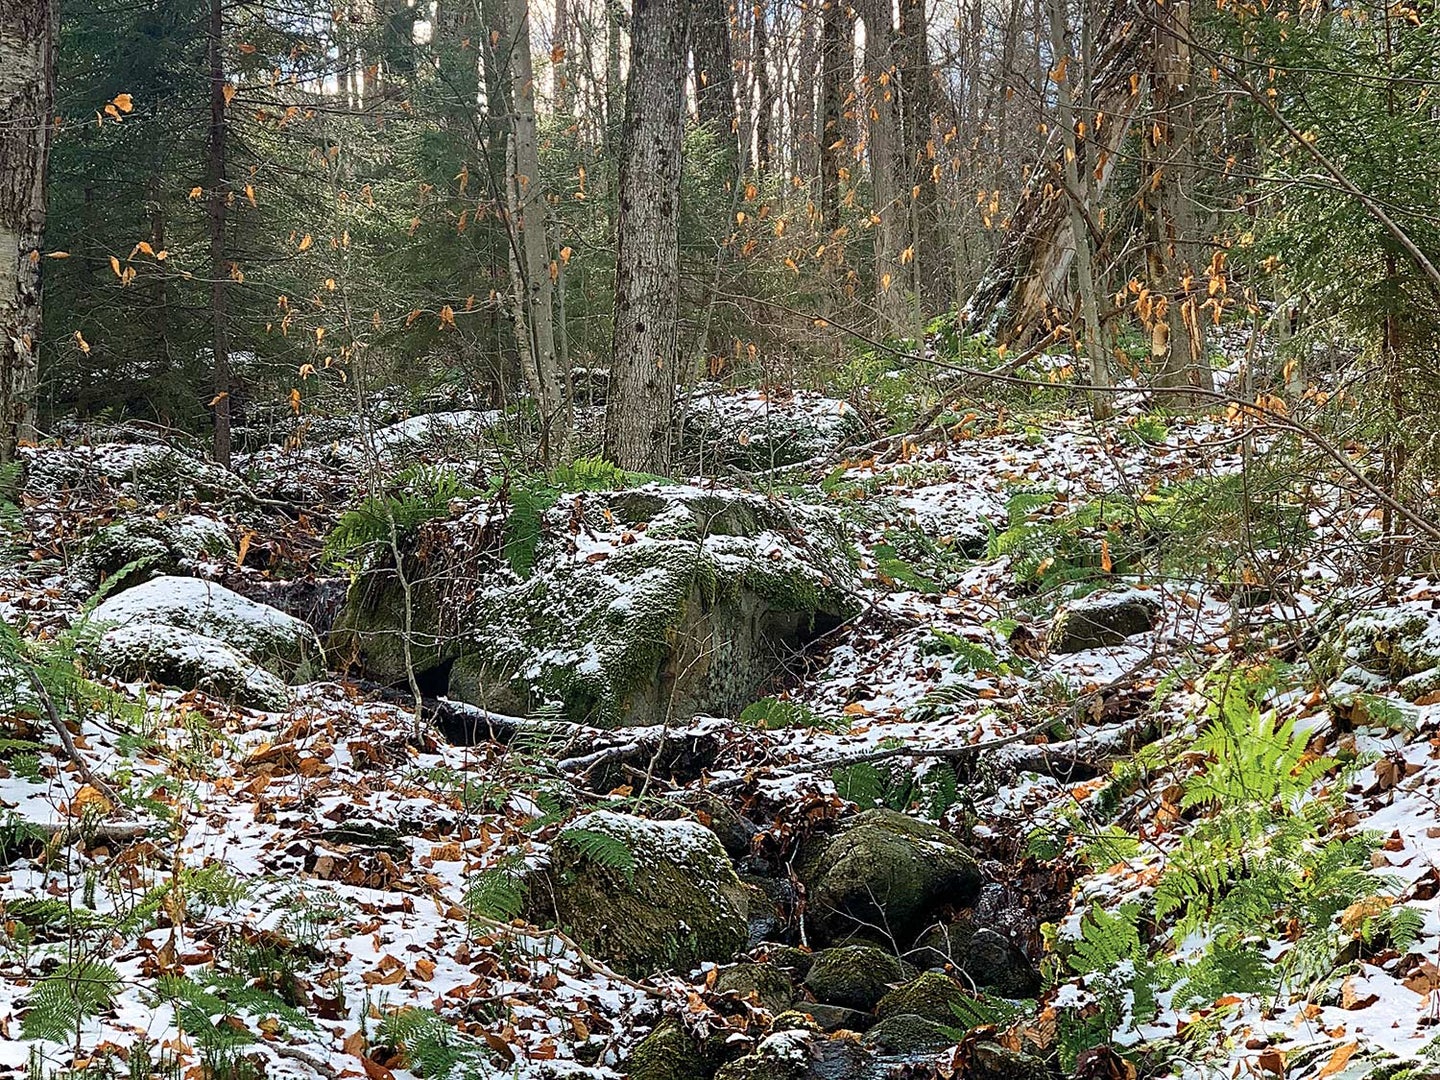 A snow covered forested area and spring.